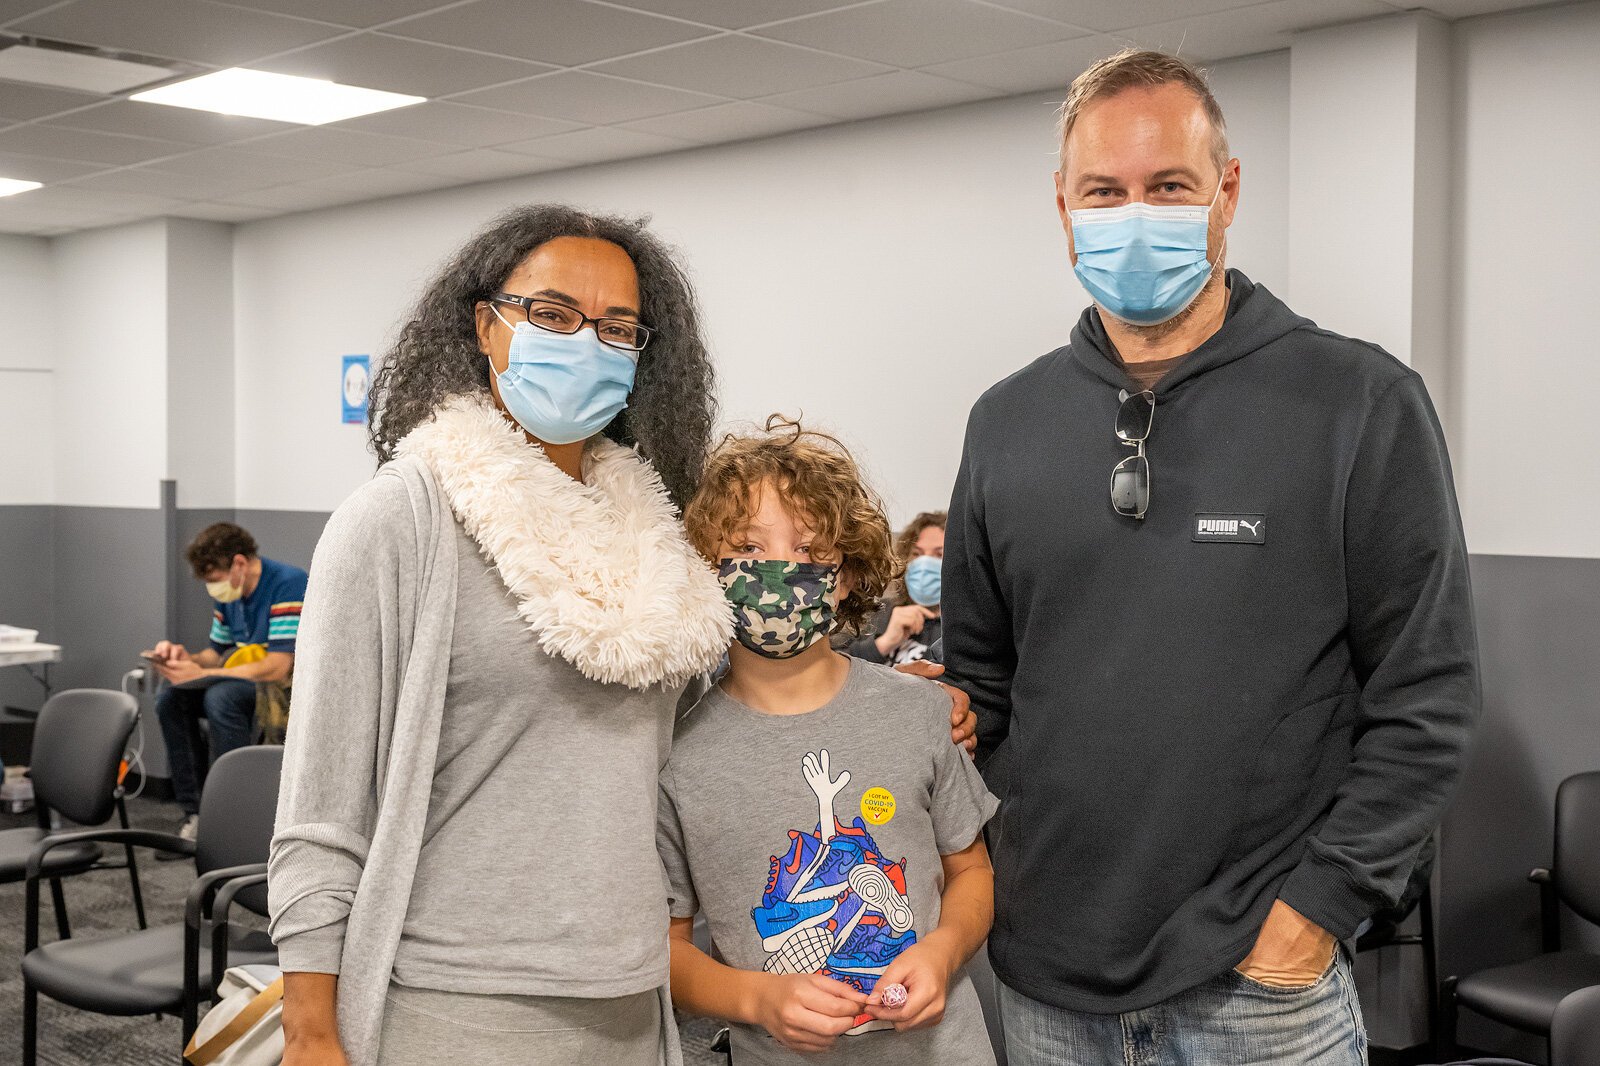 Pierre Boisseron-Kamp (center) after receiving his first vaccine shot at the WCHD with his parents Benedictte Boisseron and Ulrich Kamp.